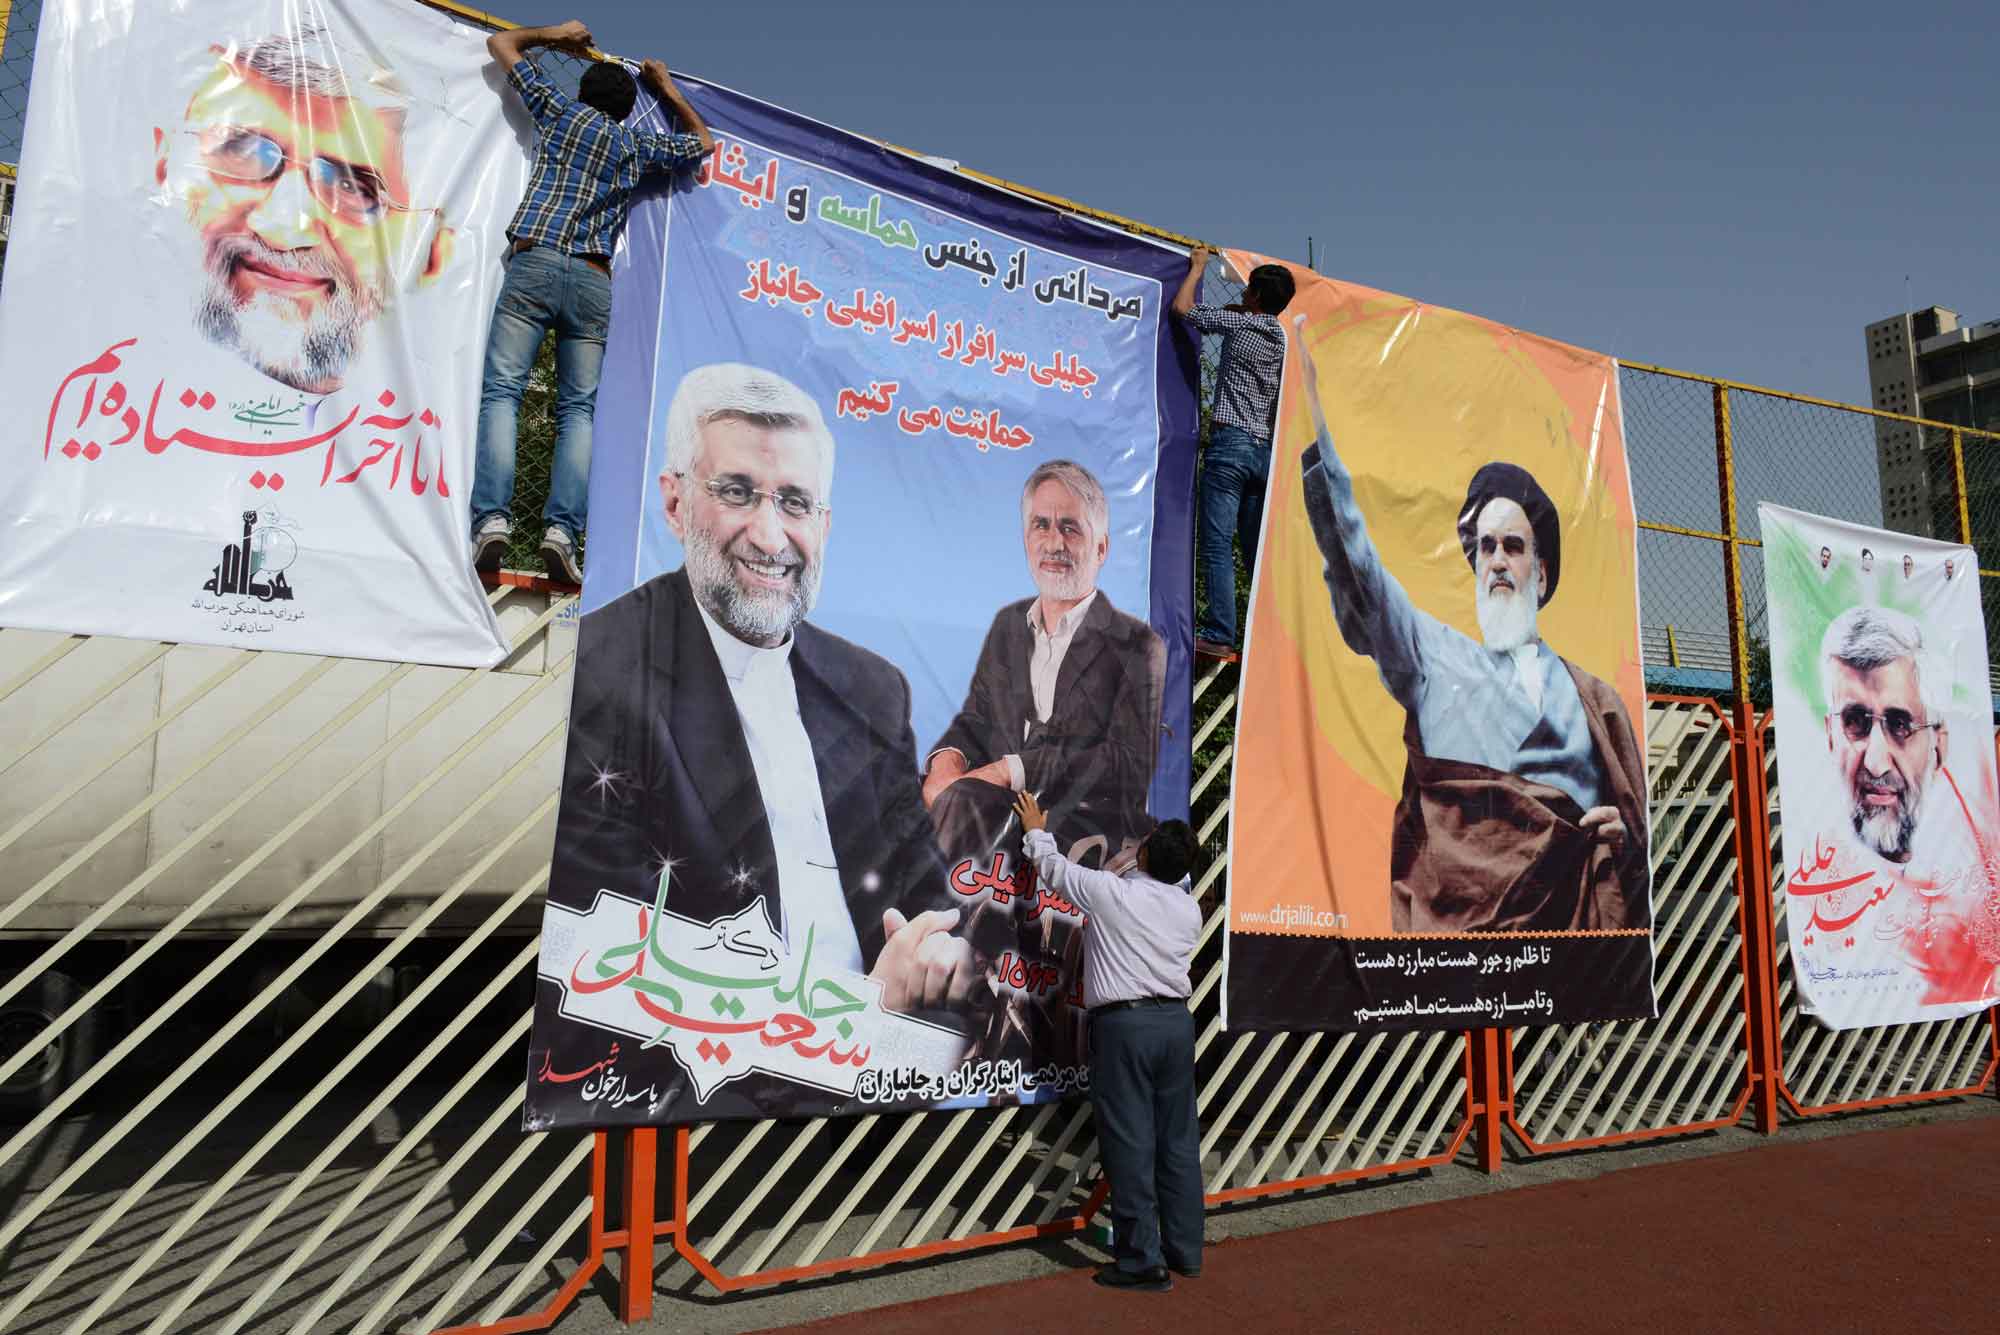 Jalili campaign posters